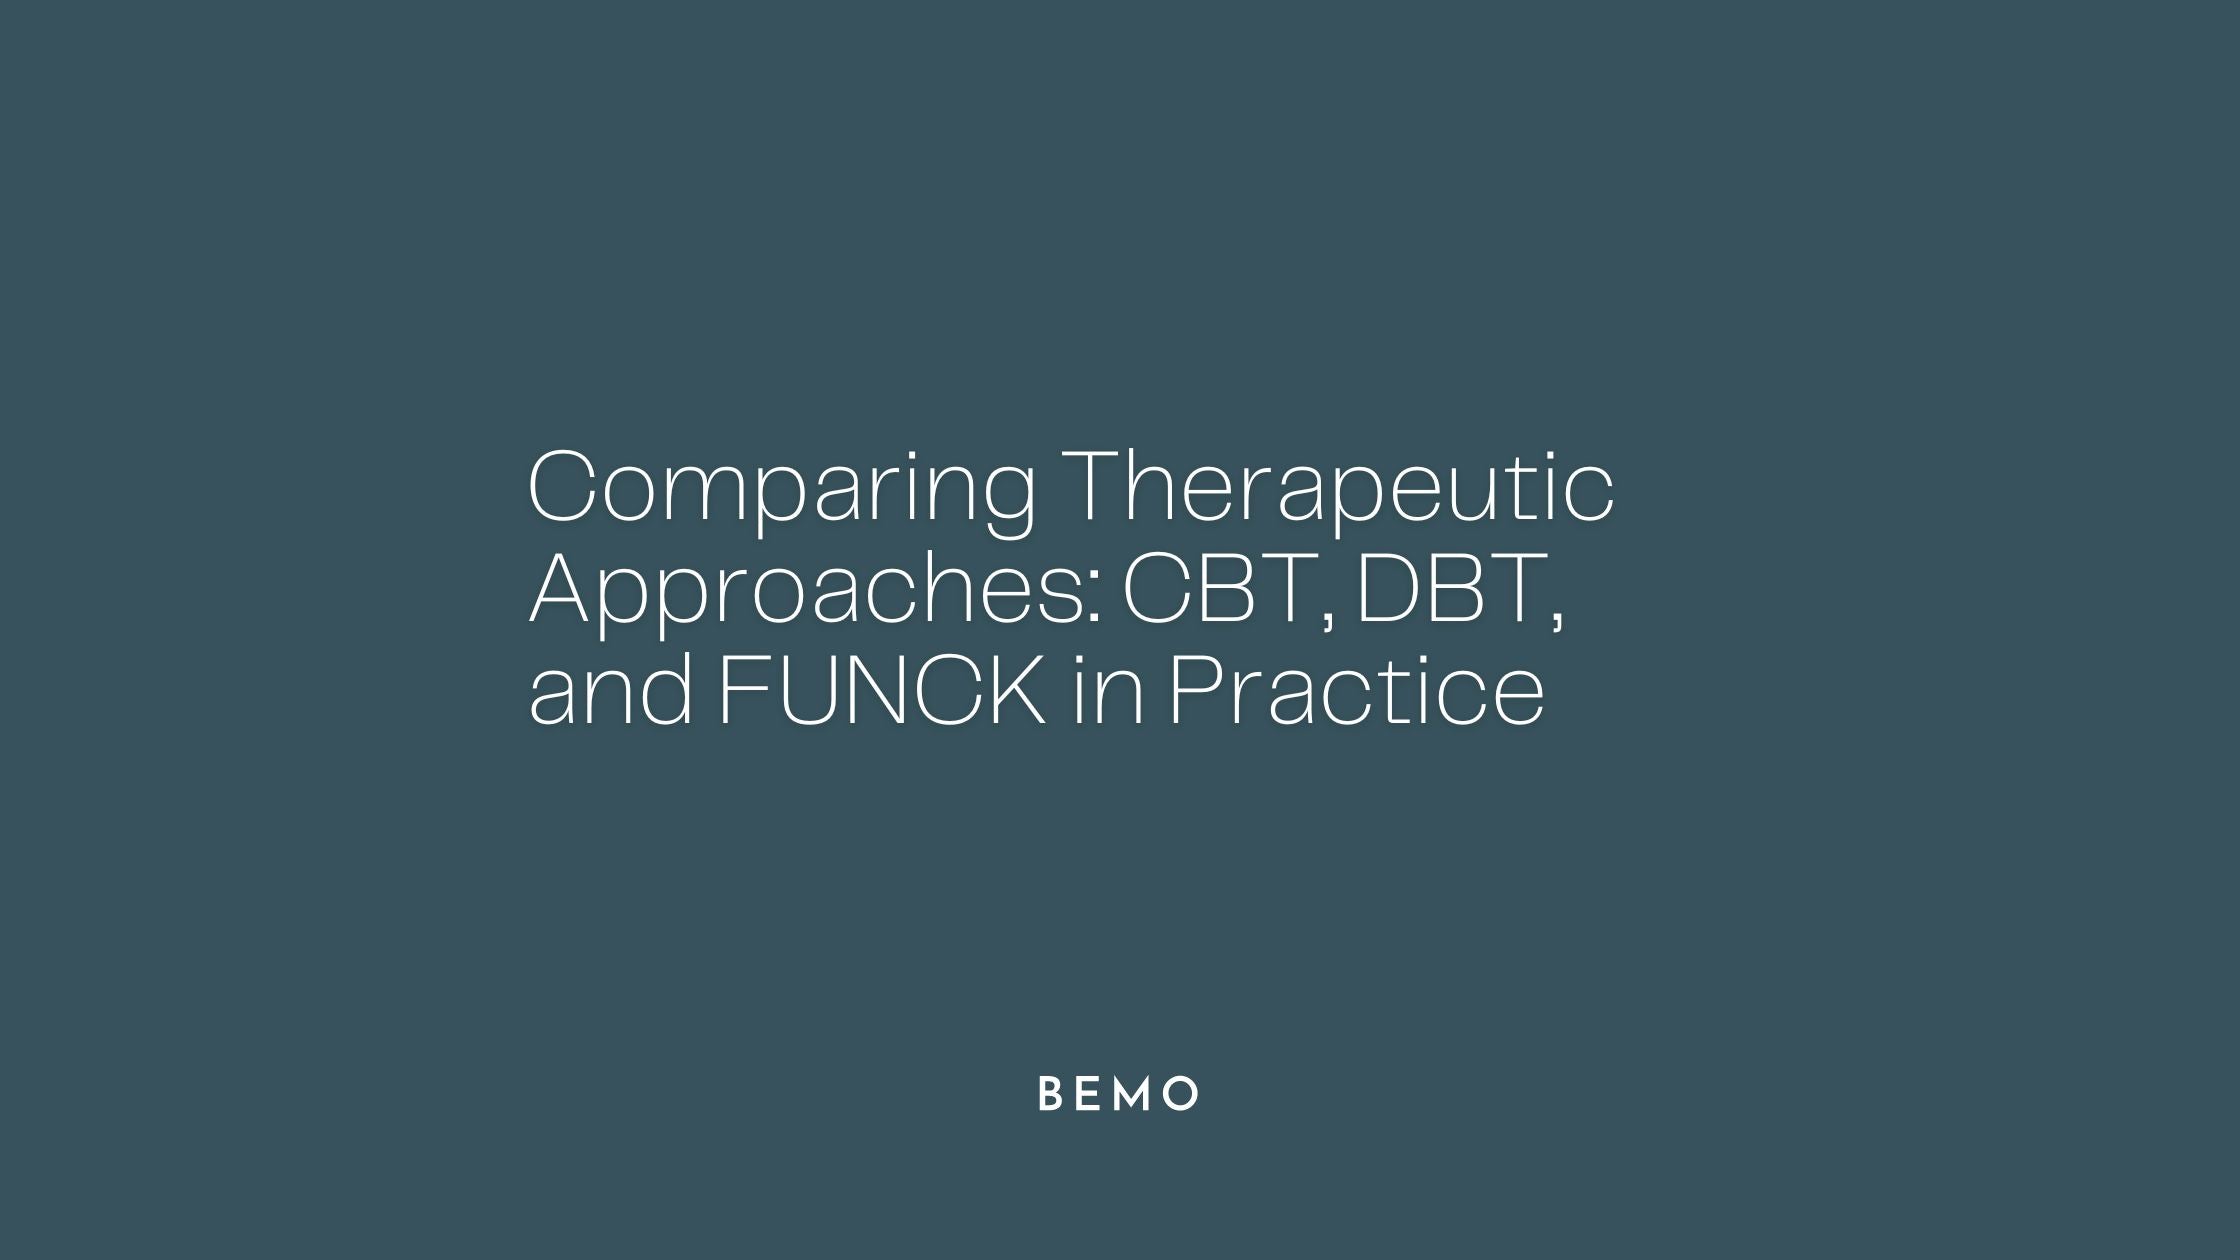 Comparing Therapeutic Approaches: CBT, DBT, and FUNCK in Practice